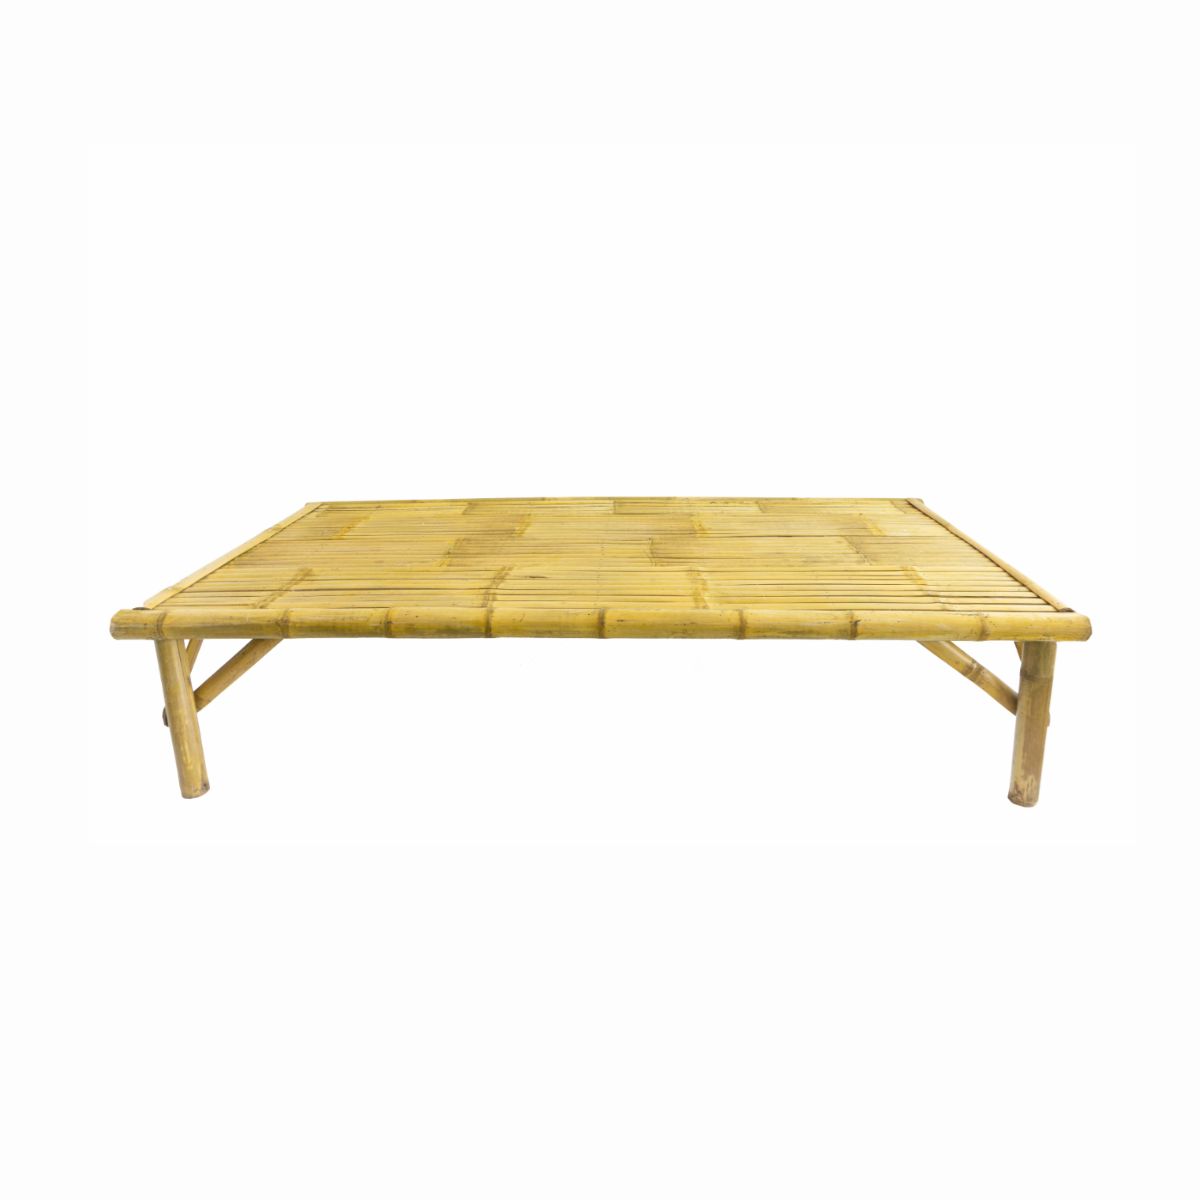  Bamboo Table 